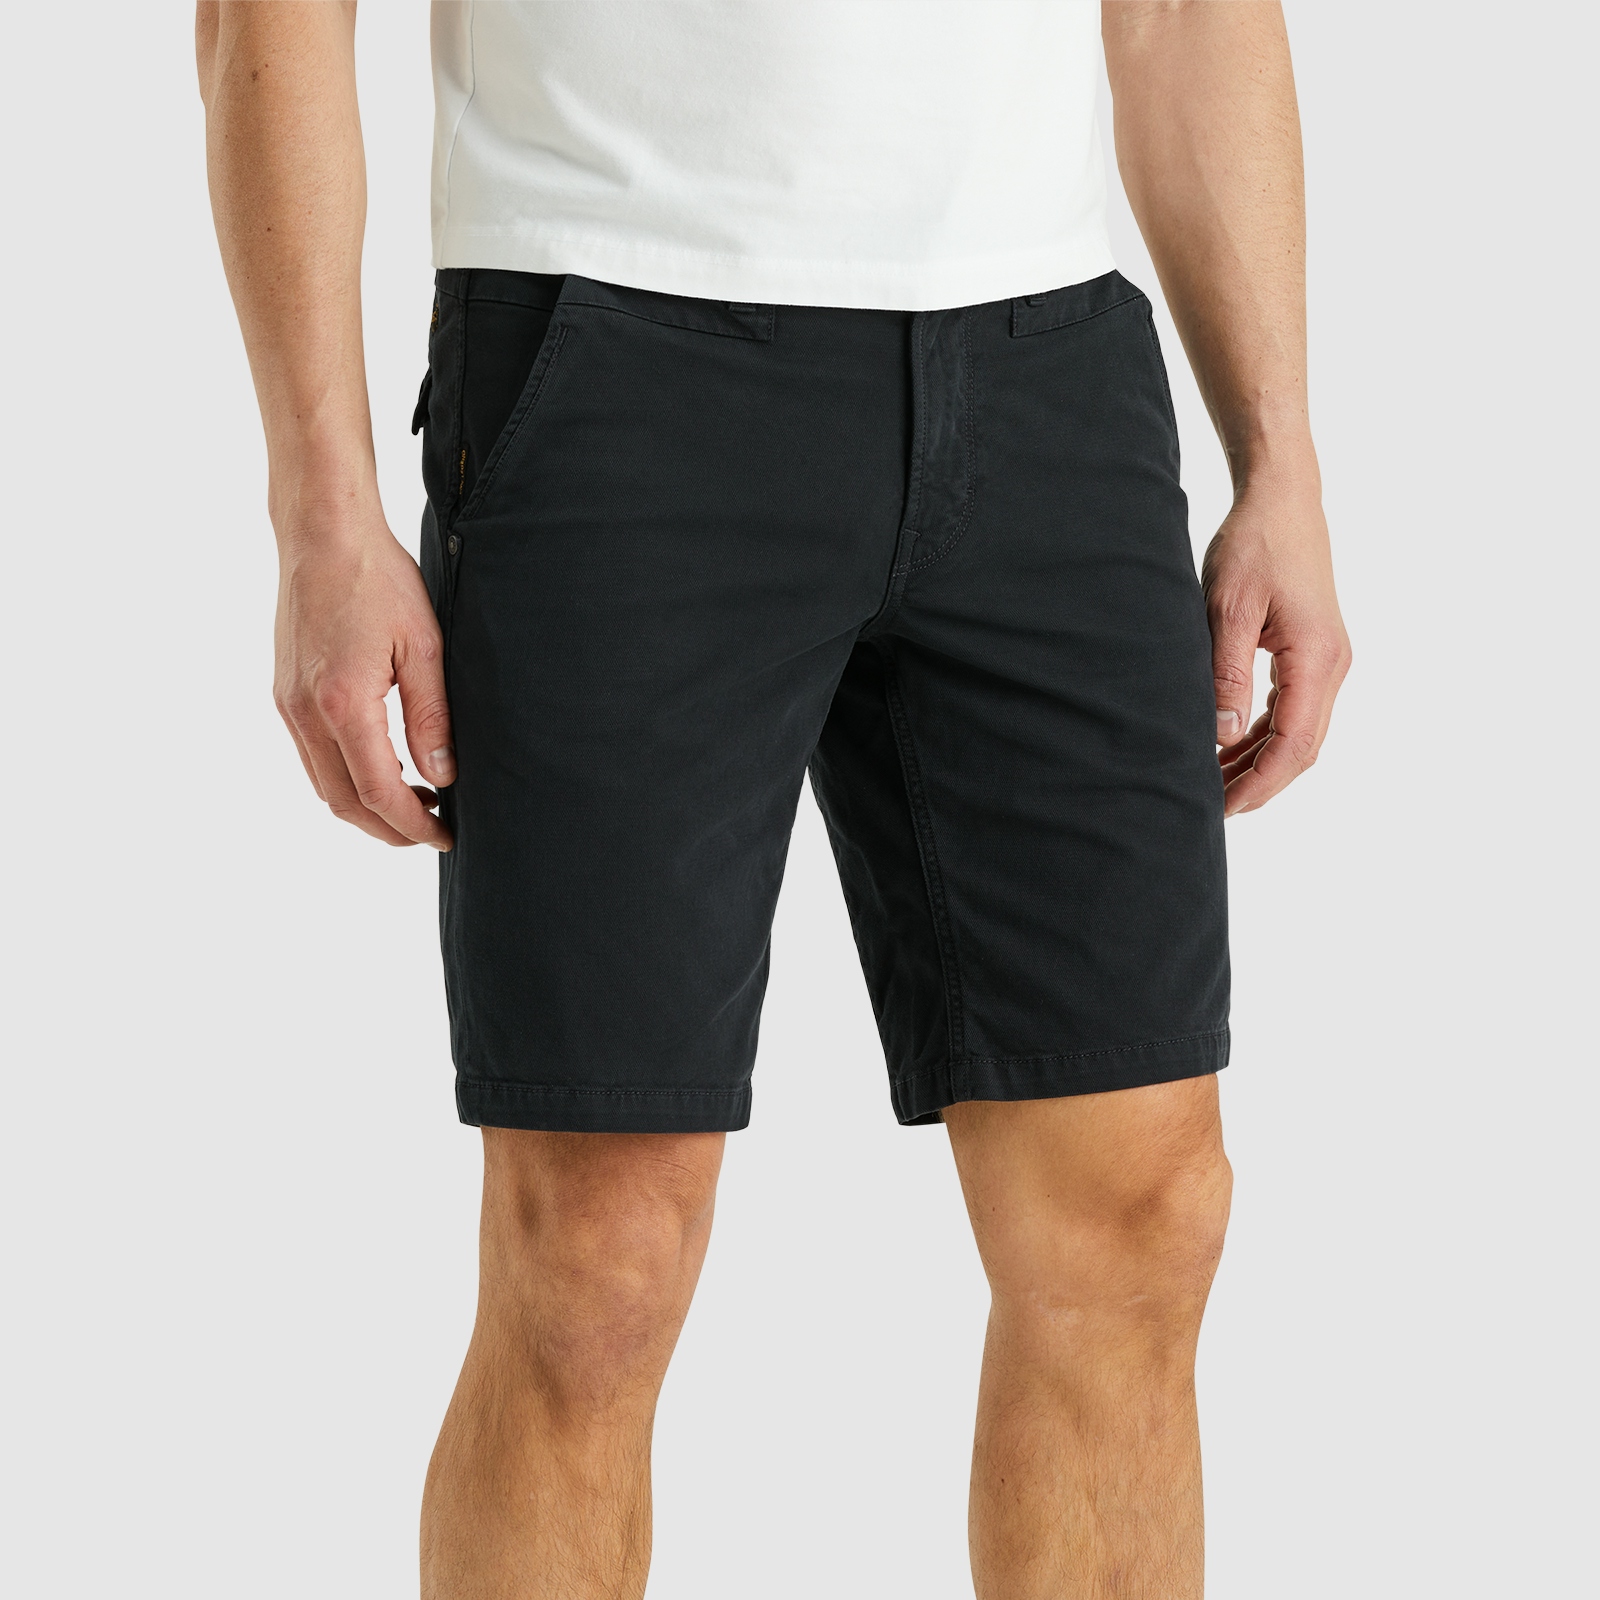 PME Legend TWIN WASP CHINO SHORTS FANCY STRUCTURED Blauw-1 1